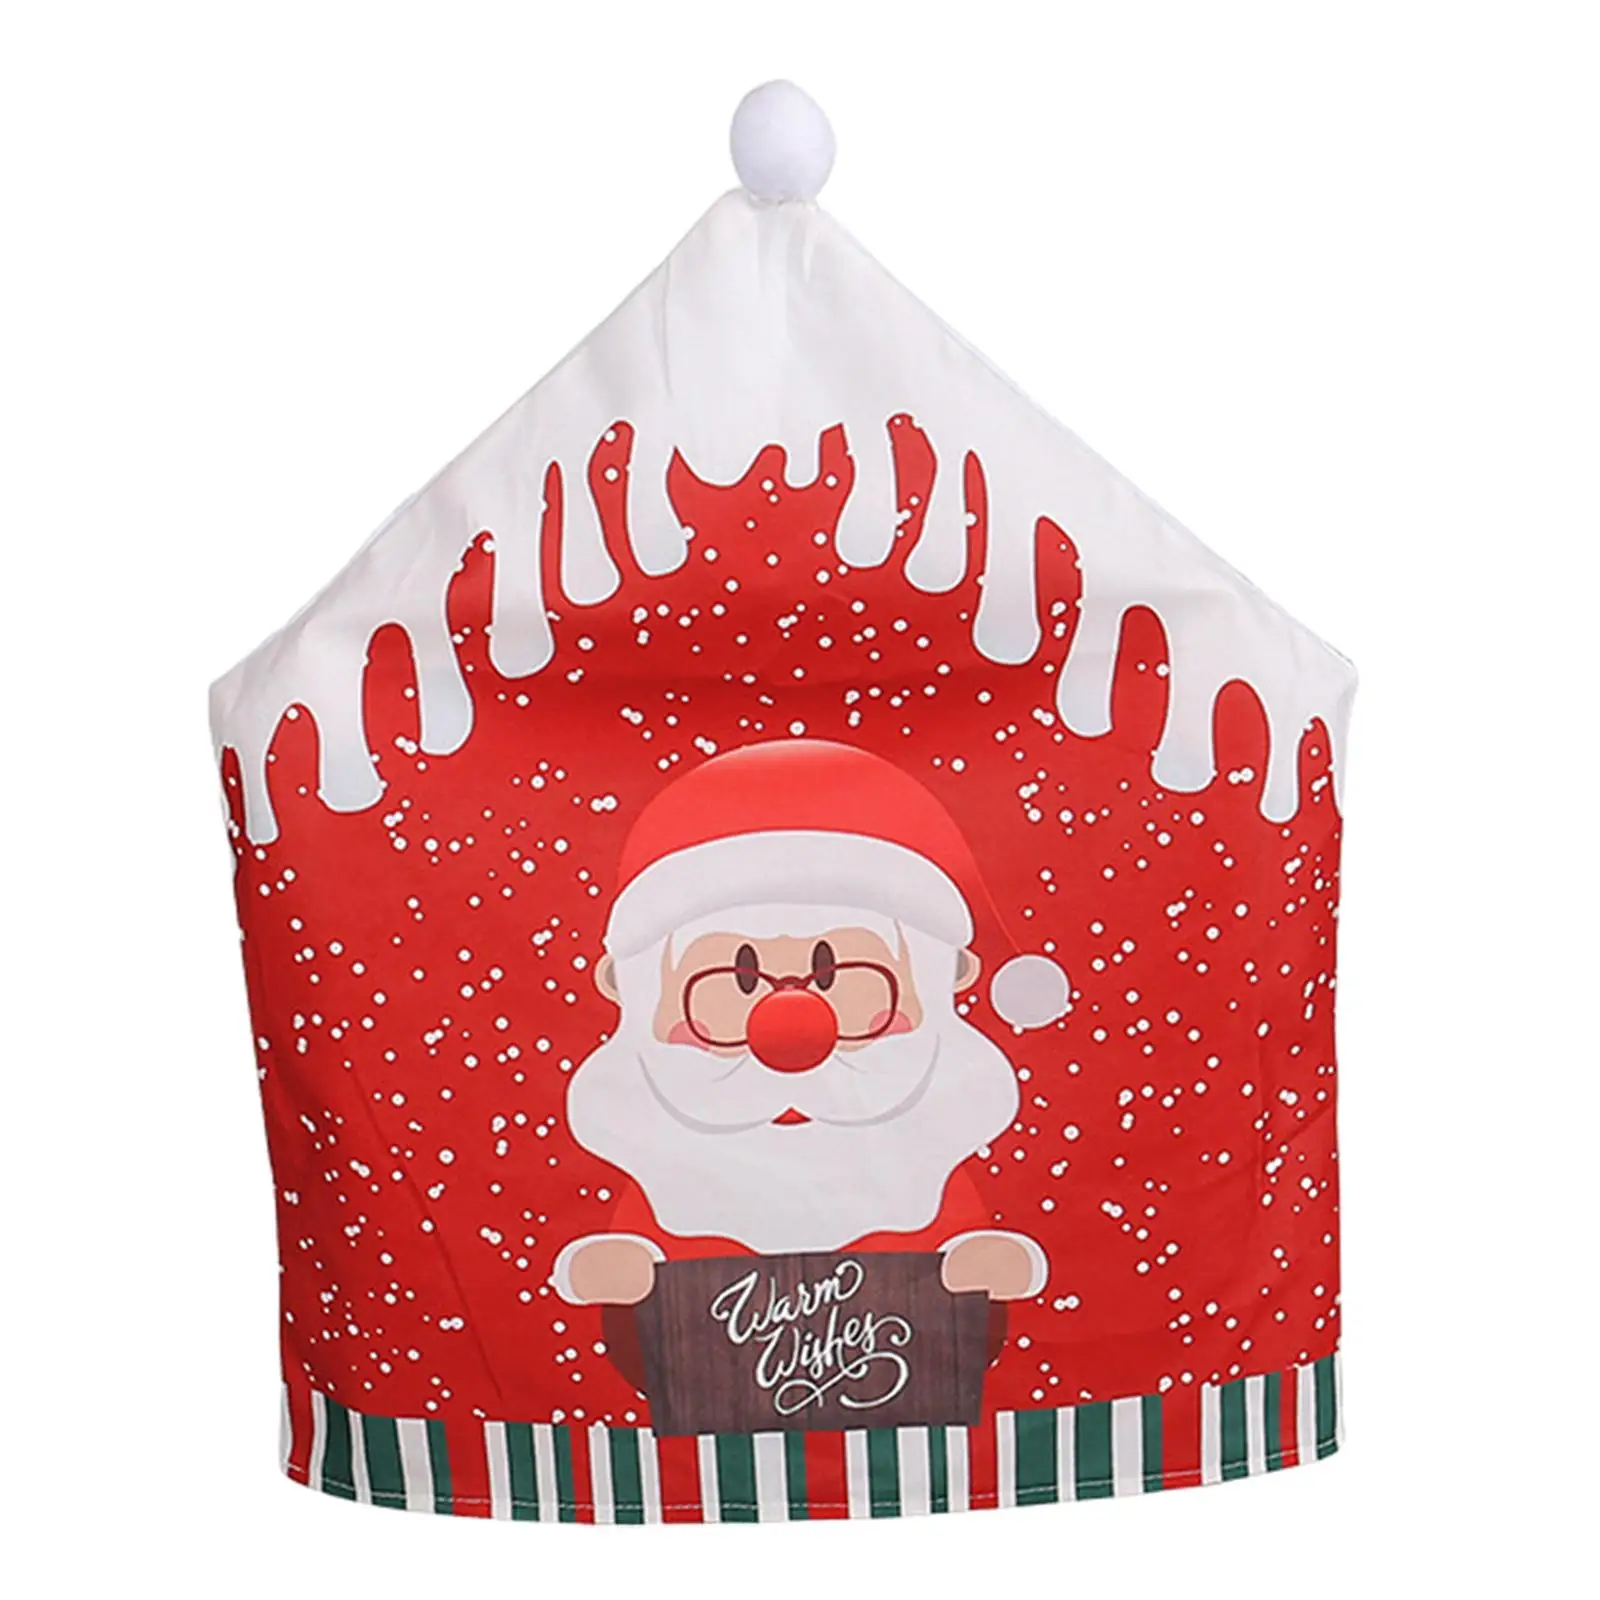 Christmas Back Cover Gifts Decoration Washable Christmas Chair Slip Cover for Kitchen Dining Room Holiday Restaurant Replacement